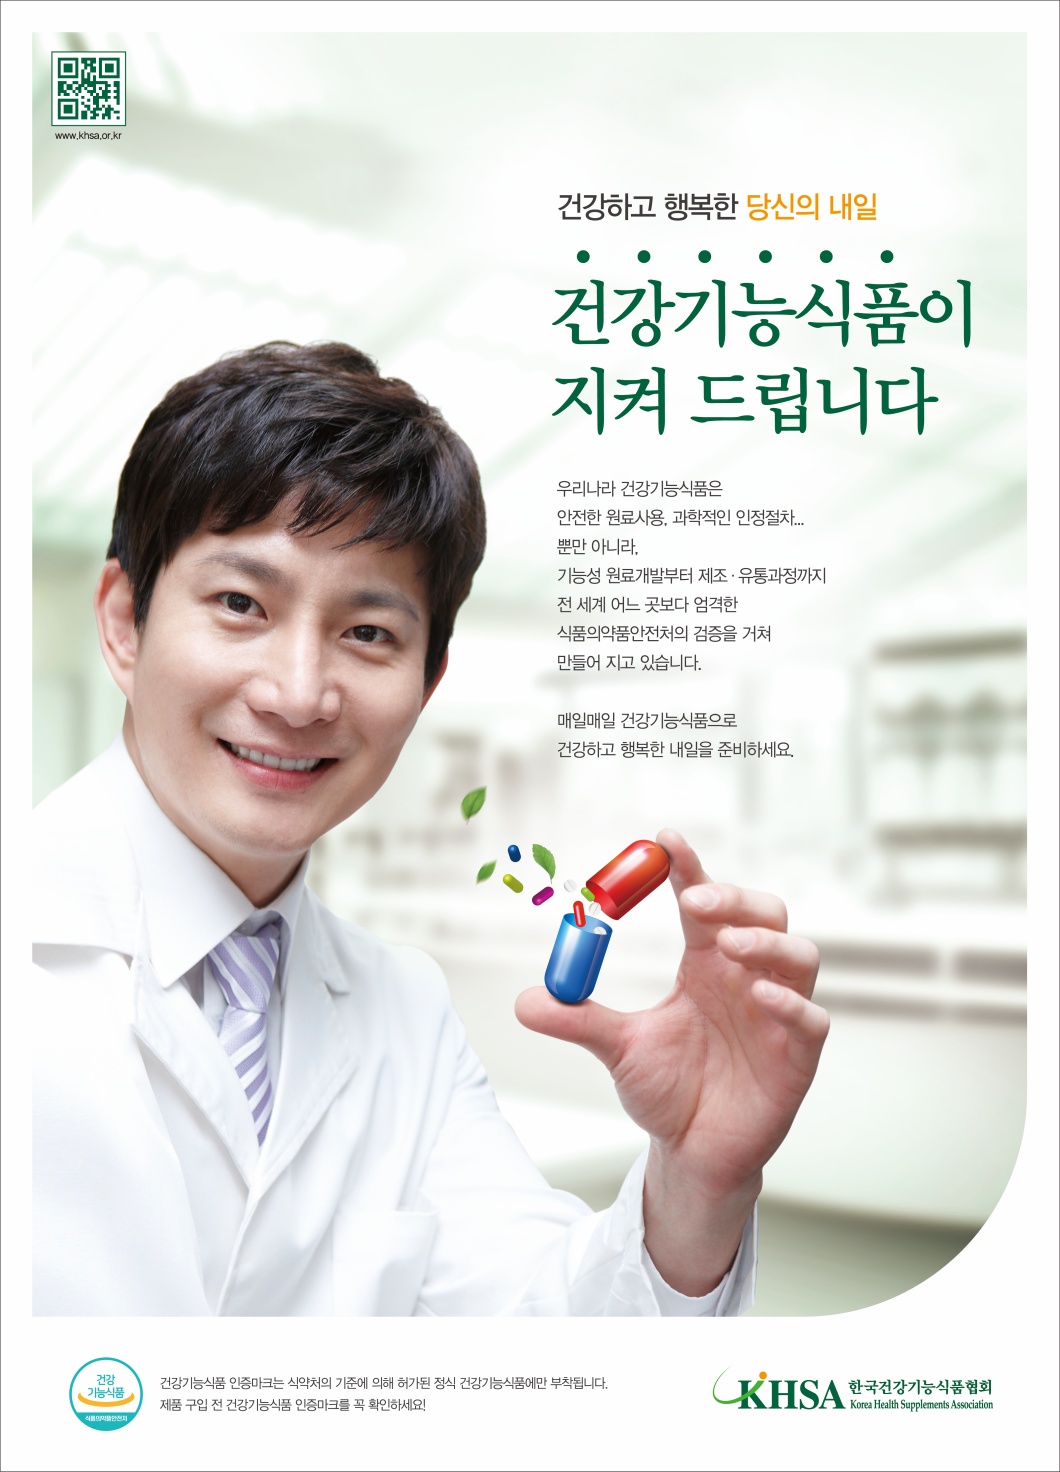 <h5>Solution</h5>
- Accurate information on health supplements should be delivered and comprehensive PR programs to raise consumer trust should be carried out<br />
- Especially during Family Month (May) and Korean Thanksgiving Day, Chuseok, the brand’s key message should be exposed to consumers, after considering the market situation, interests, and consumer perception levels<br />
- Target to people in 20s and 30s are which having increase rate in health supplements with on- and off-line marketing activities are needed<br />
- Korea Health Supplements Association started to publish the magazine ‘Health Supplements Today’ to boost communication within the industry and to present various interesting content from the local and global market situation to relevant policy information